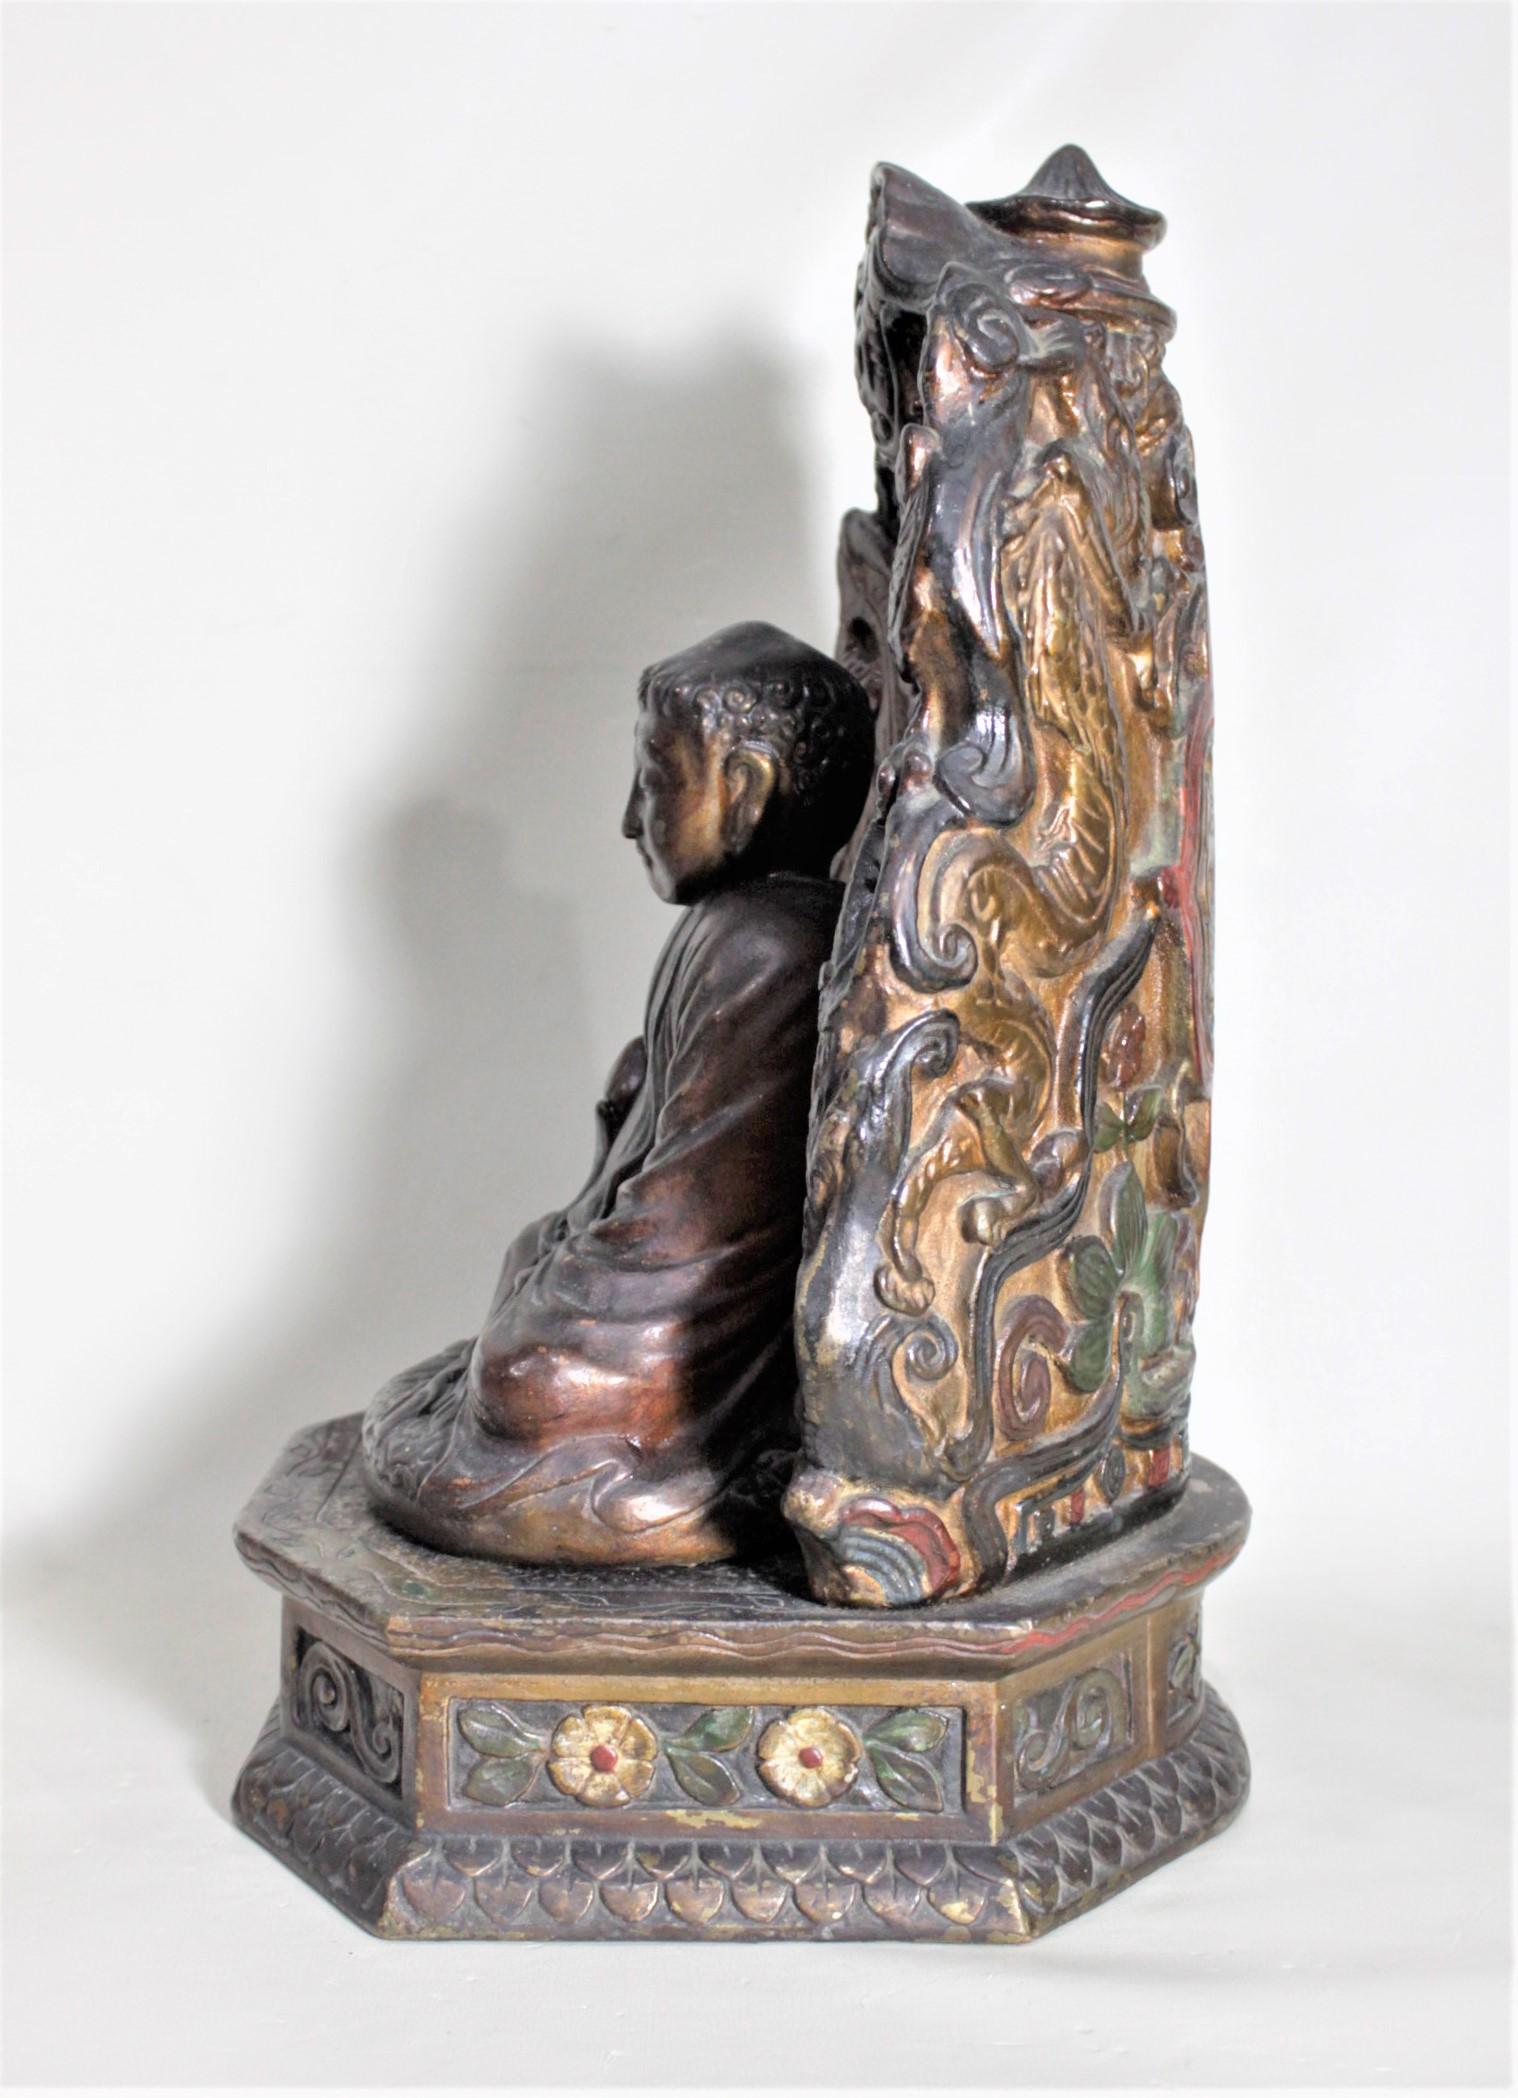 Antique Bronze Clad & Polychrome Painted Buddha Sculpture with Pedestal Stand In Good Condition For Sale In Hamilton, Ontario